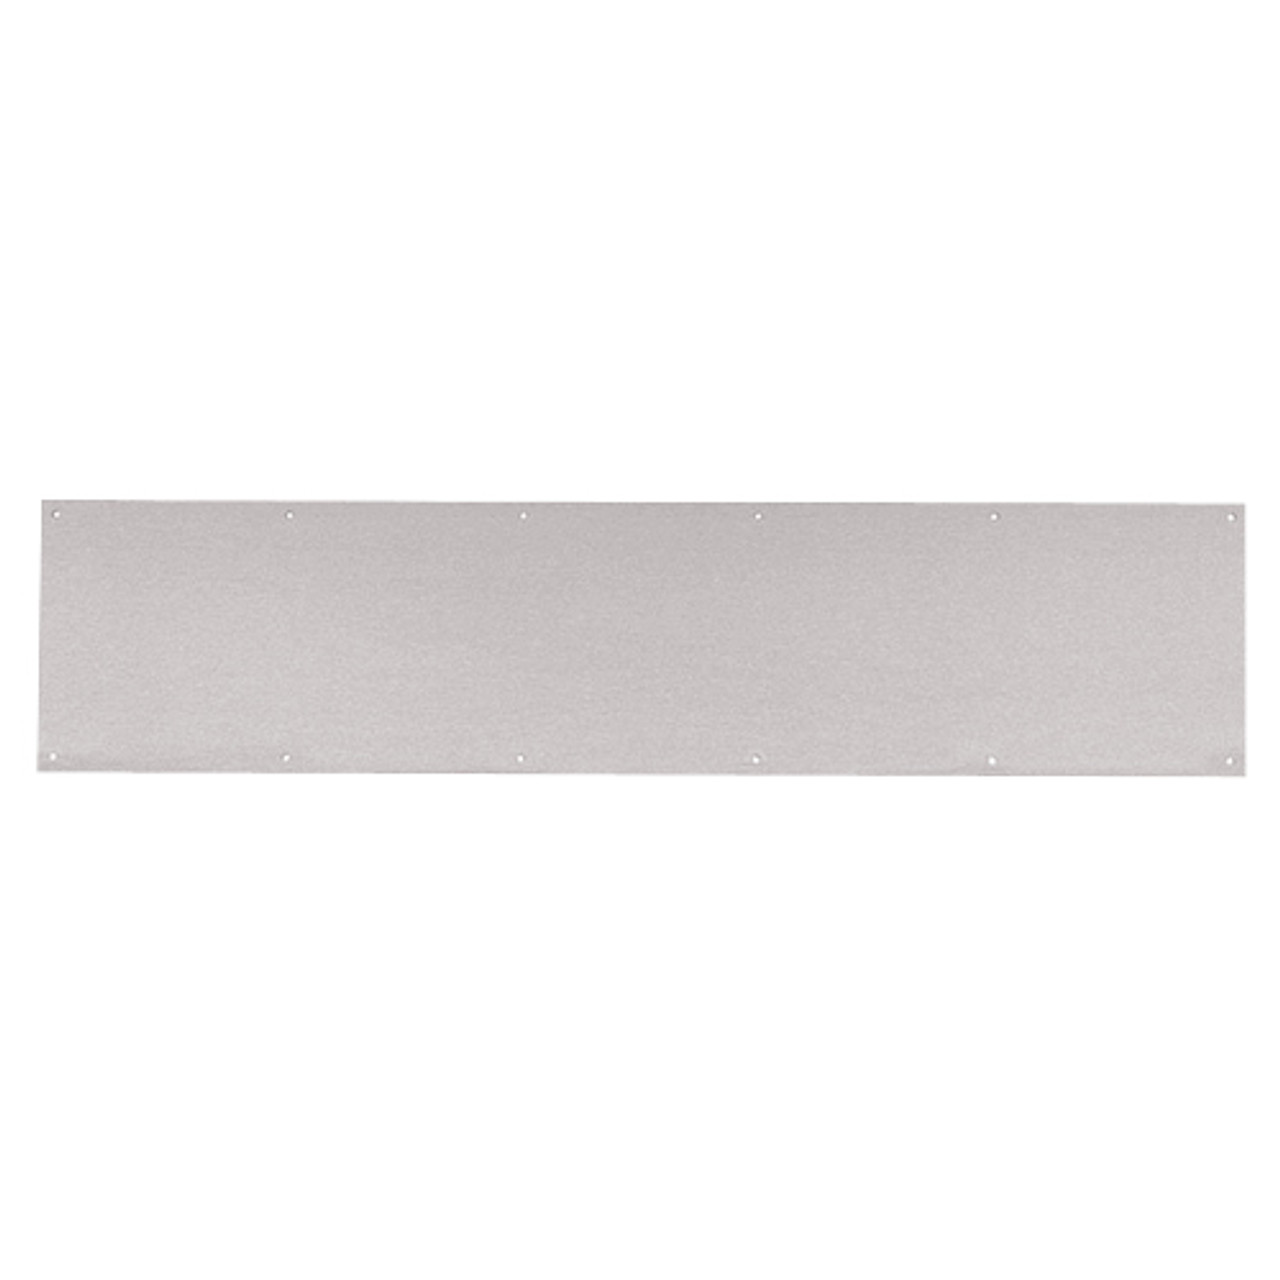 8400-US32D-33x33-B-CS Ives 8400 Series Protection Plate in Satin Stainless Steel